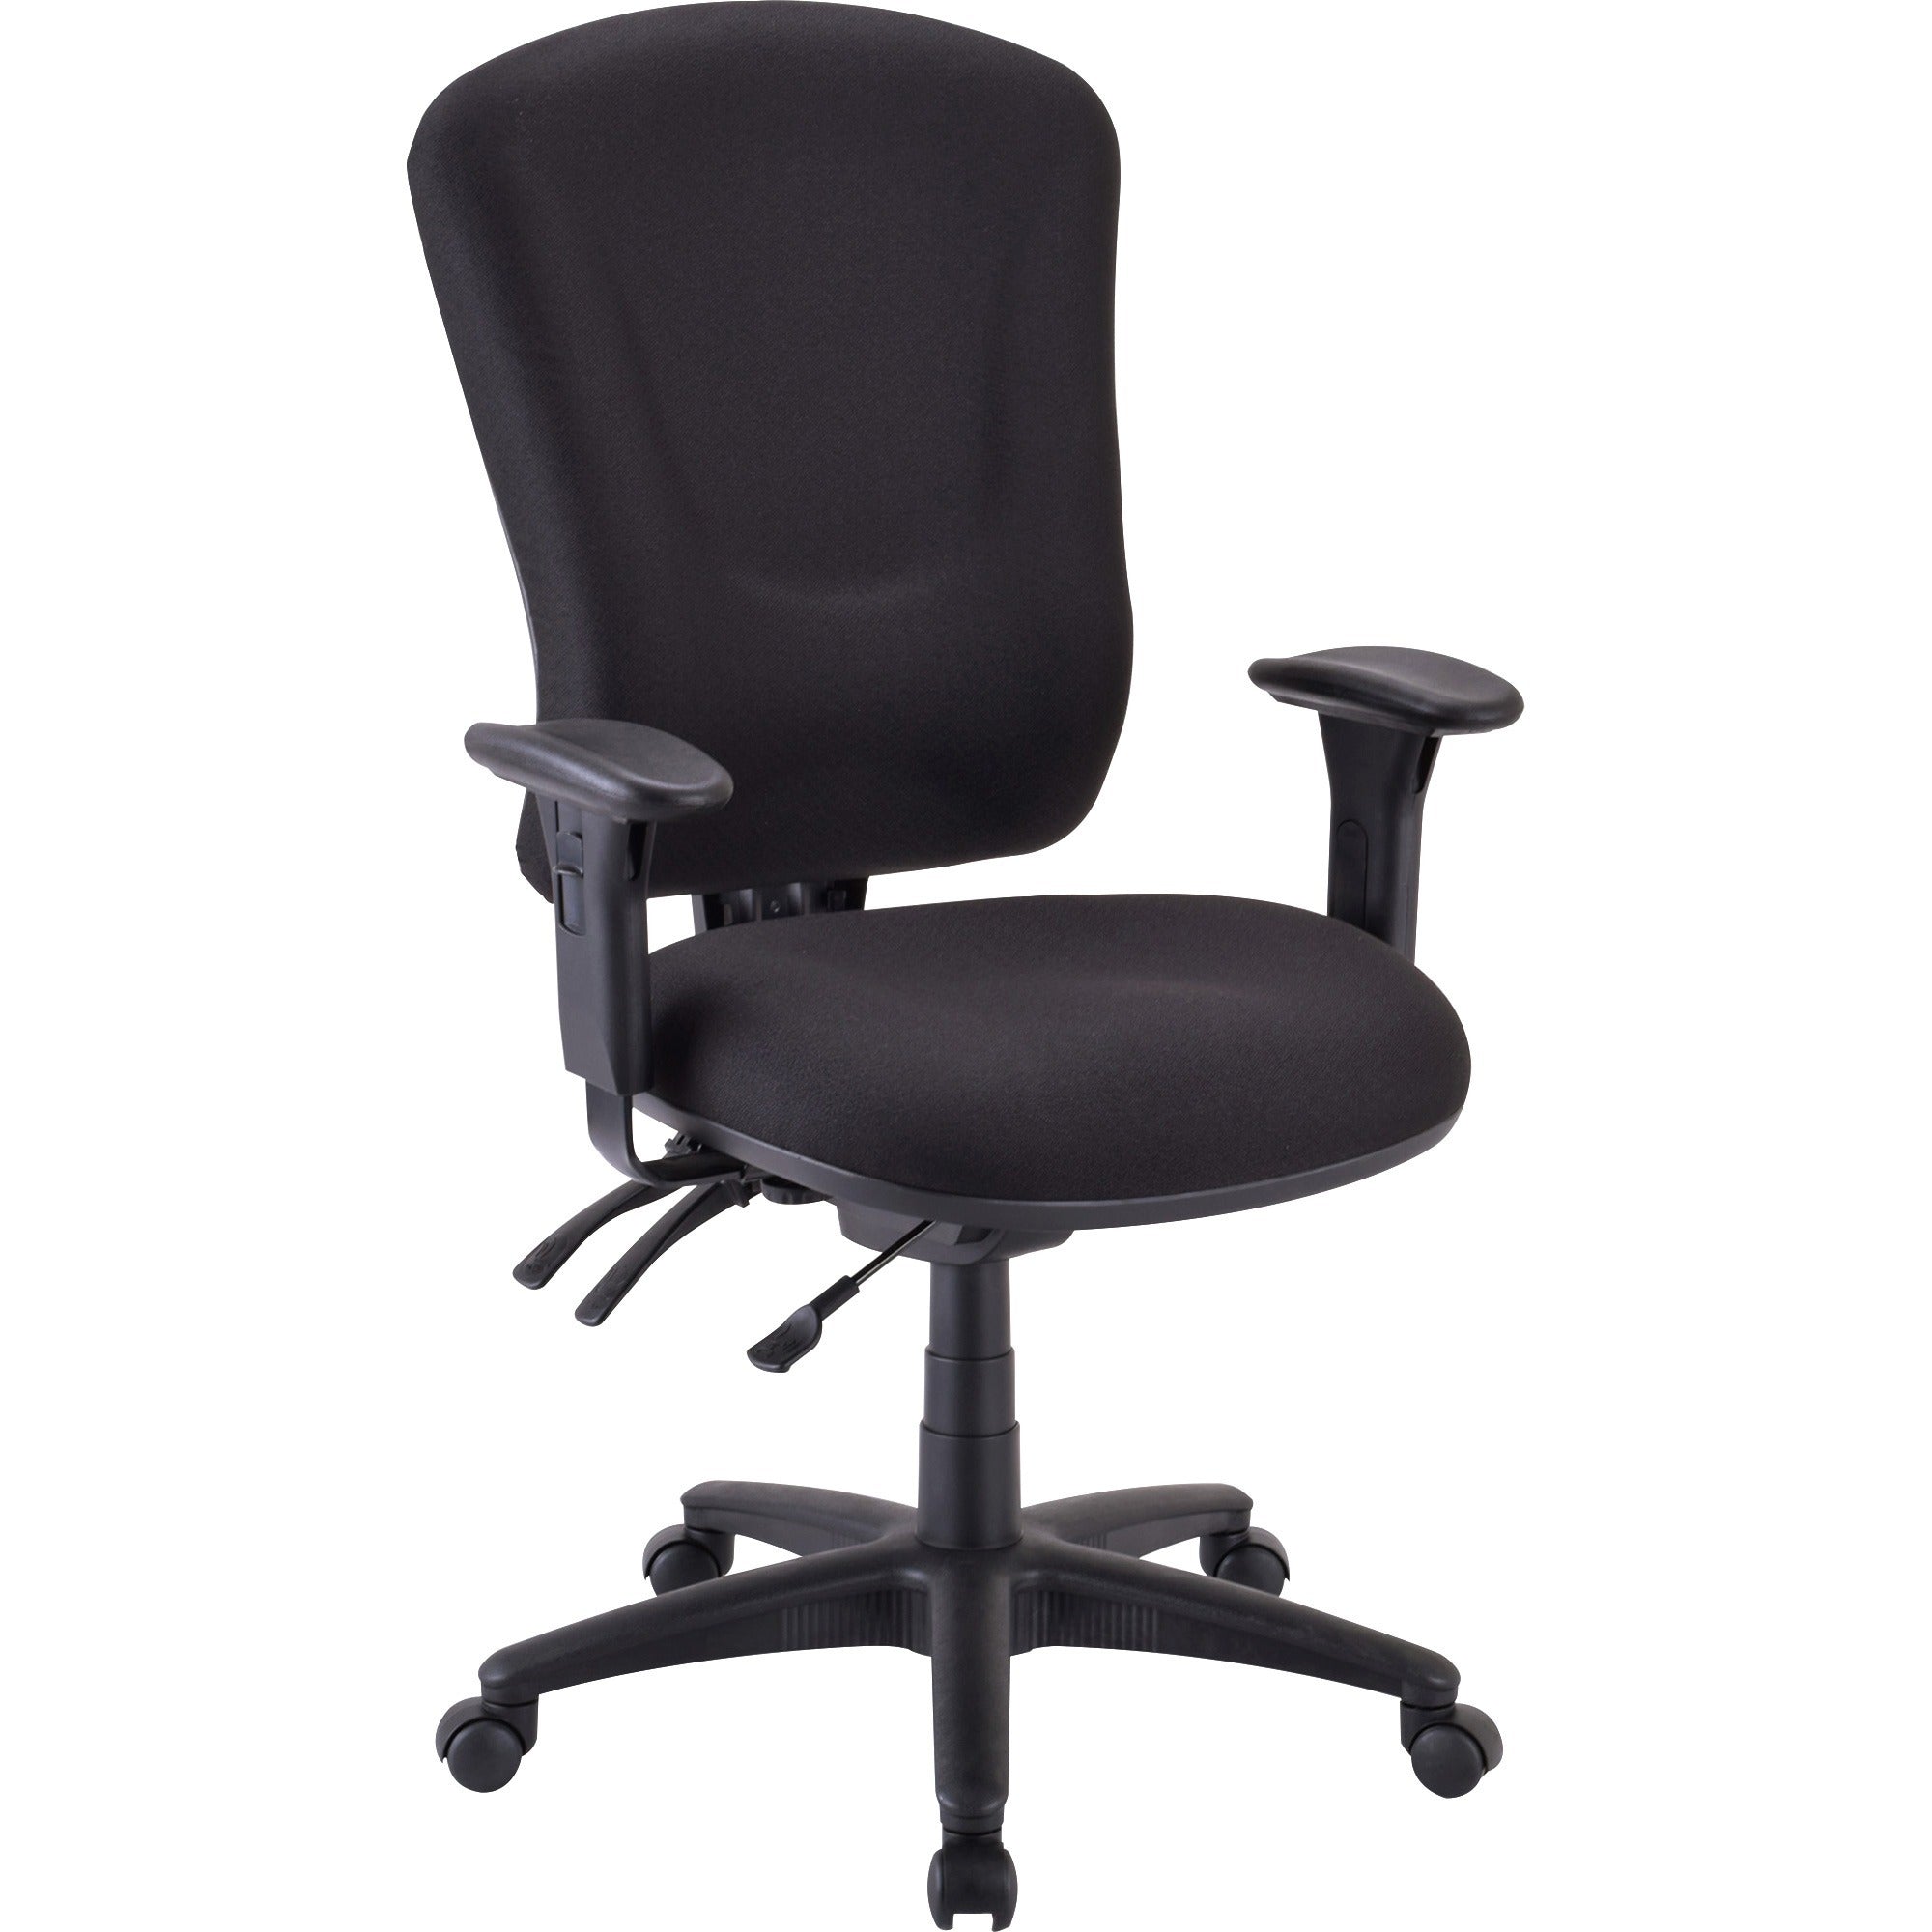 Lorell Contoured Managerial Task Chair - Black Polyester Seat - Black Frame - 1 Each - 